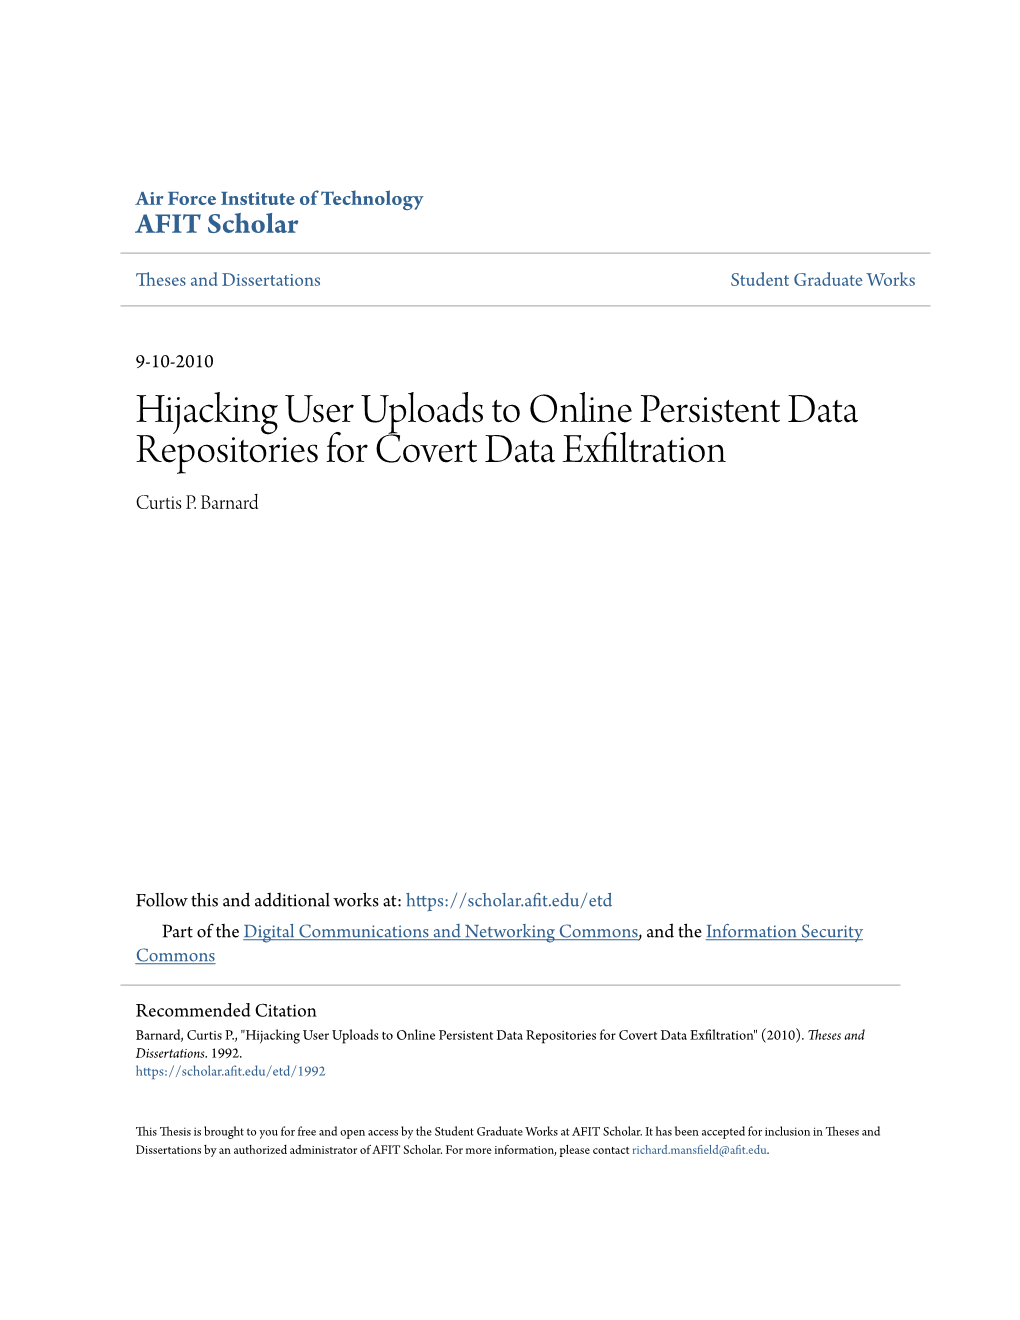 Hijacking User Uploads to Online Persistent Data Repositories for Covert Data Exfiltration Curtis P